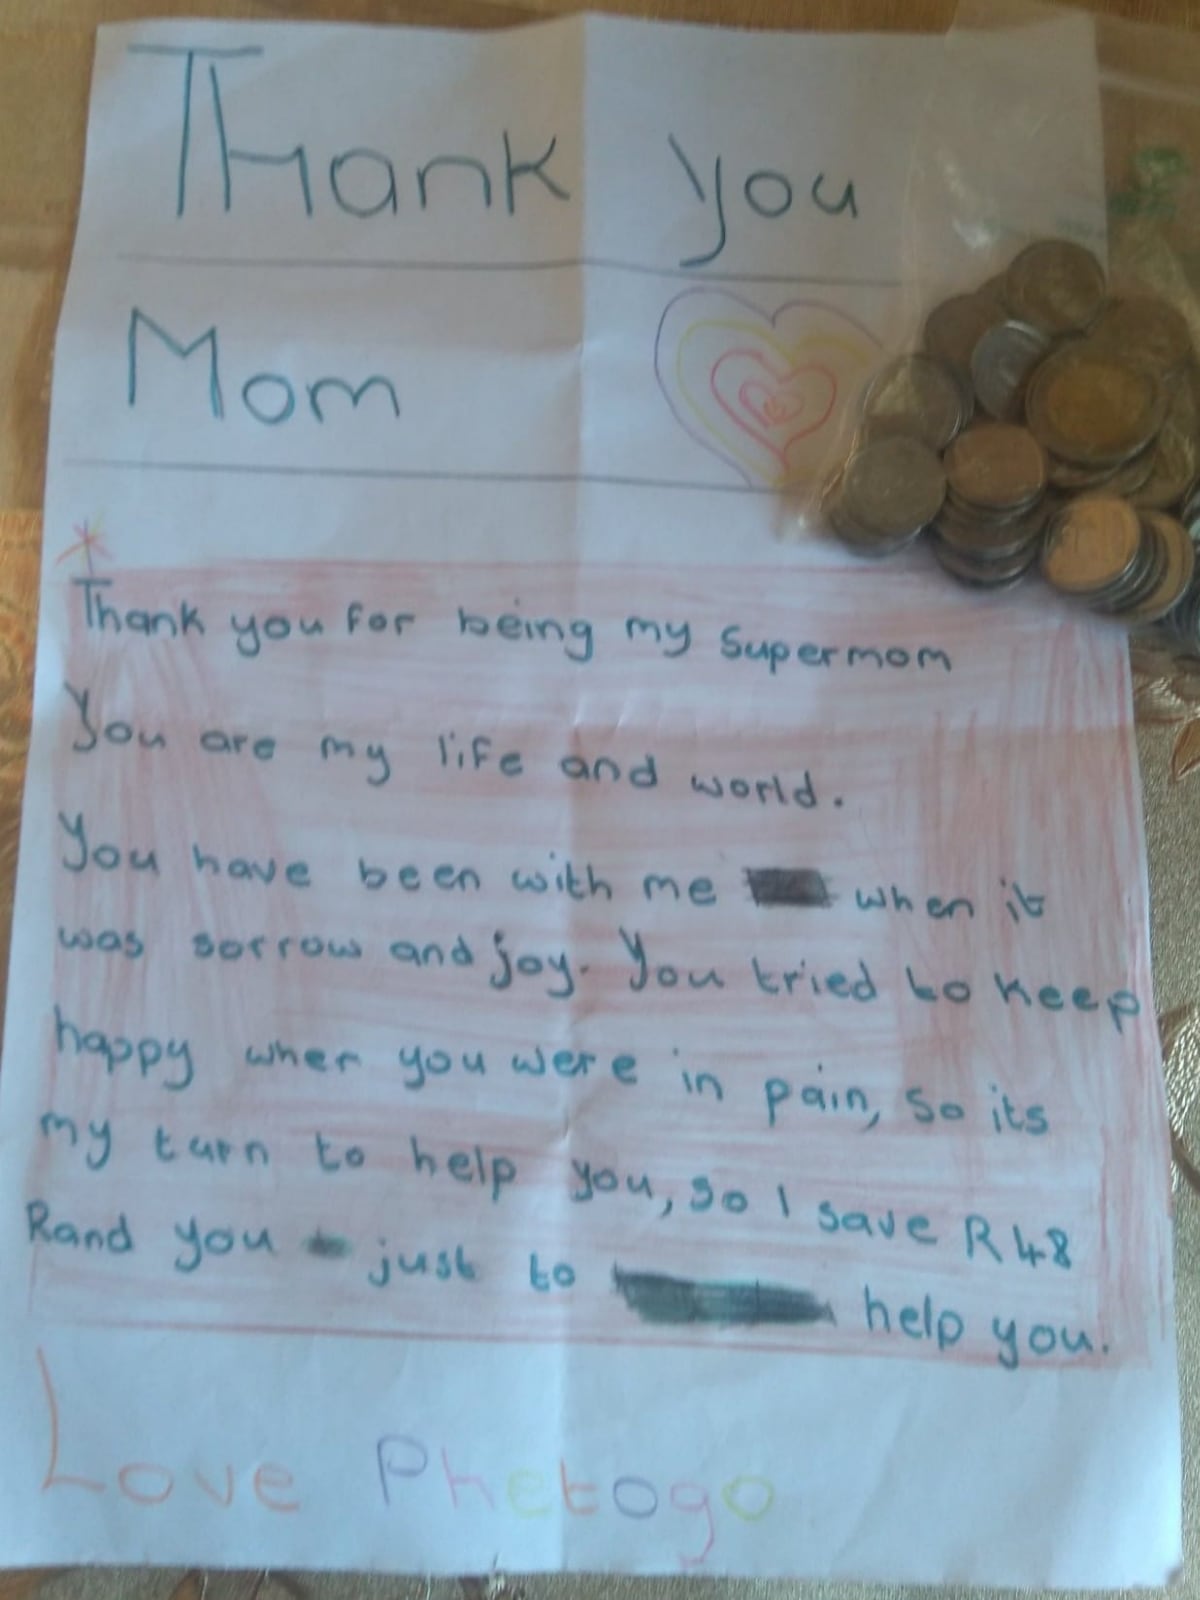 The touching note brought the mom to tears.